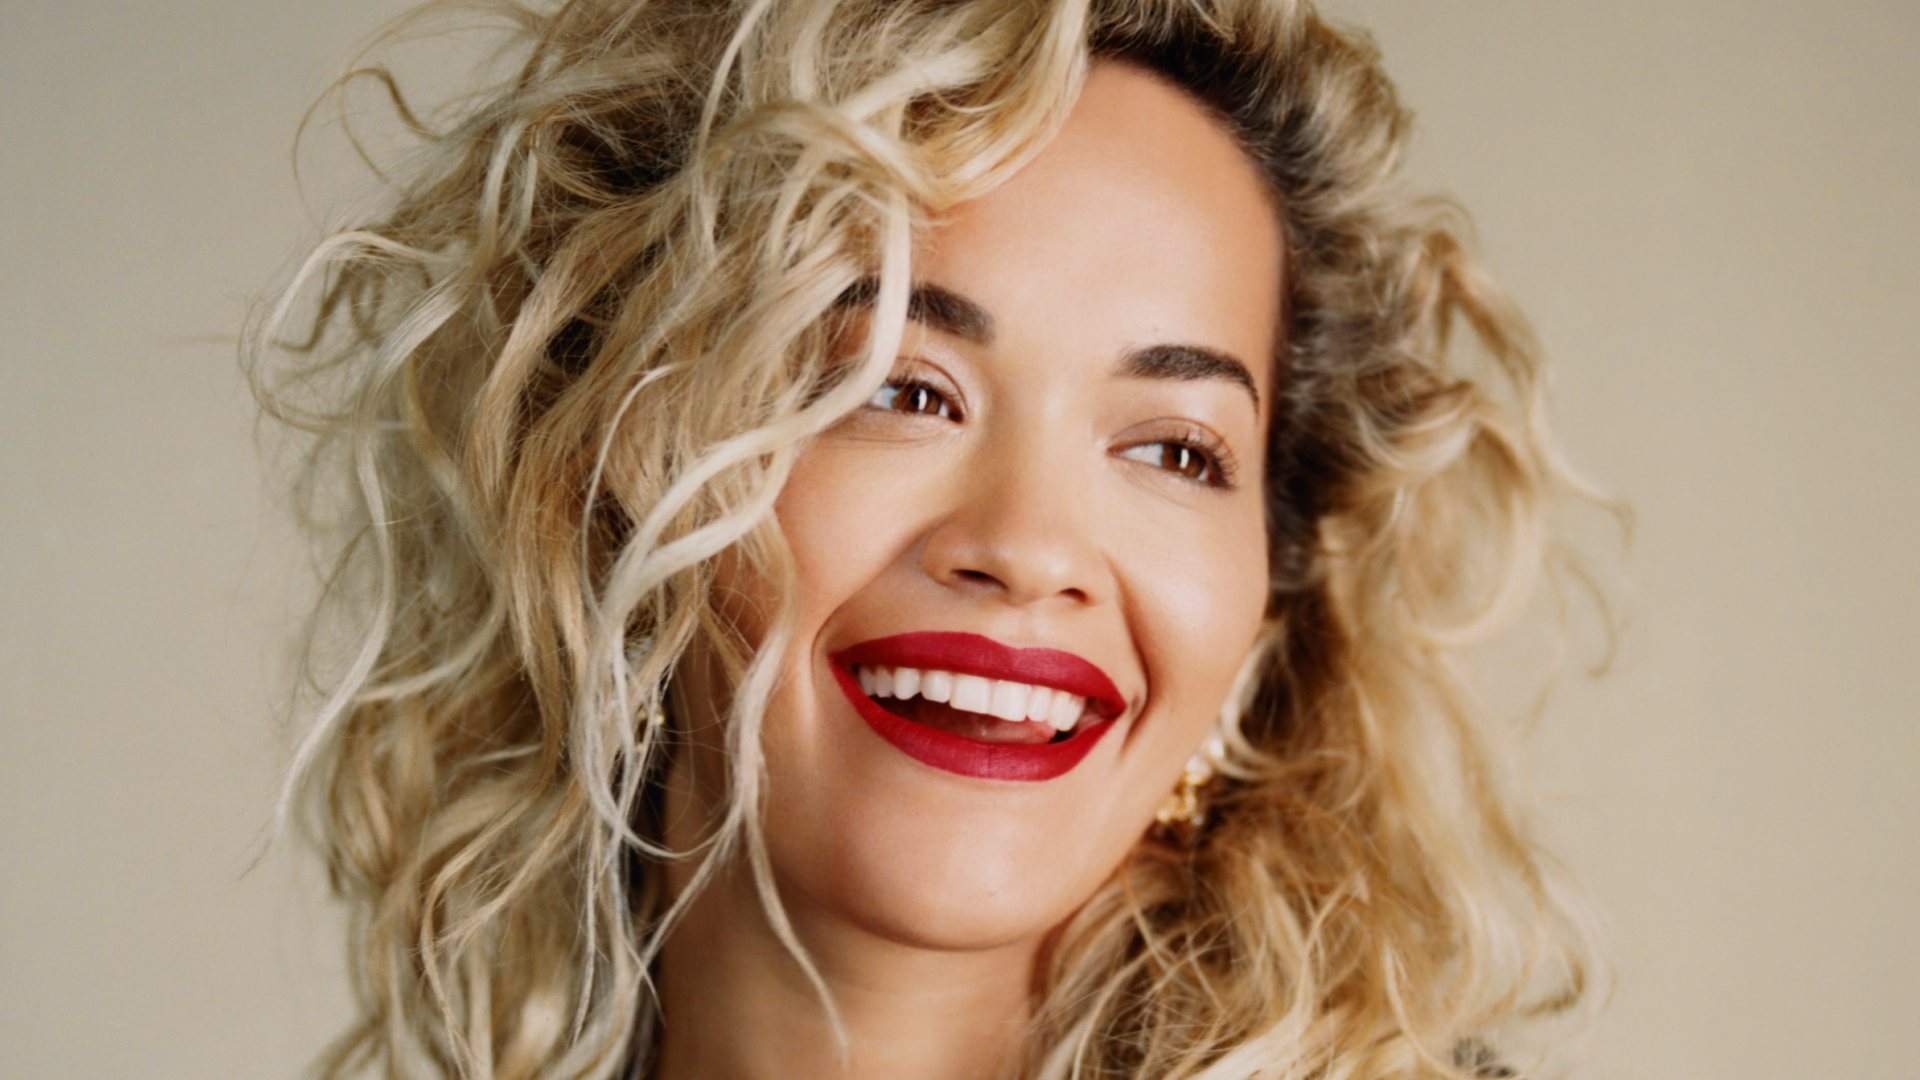 Rita Ora, Benee and Shapeshifter Will Headline This Year's Women's Rugby World Cup Matches at Eden Park